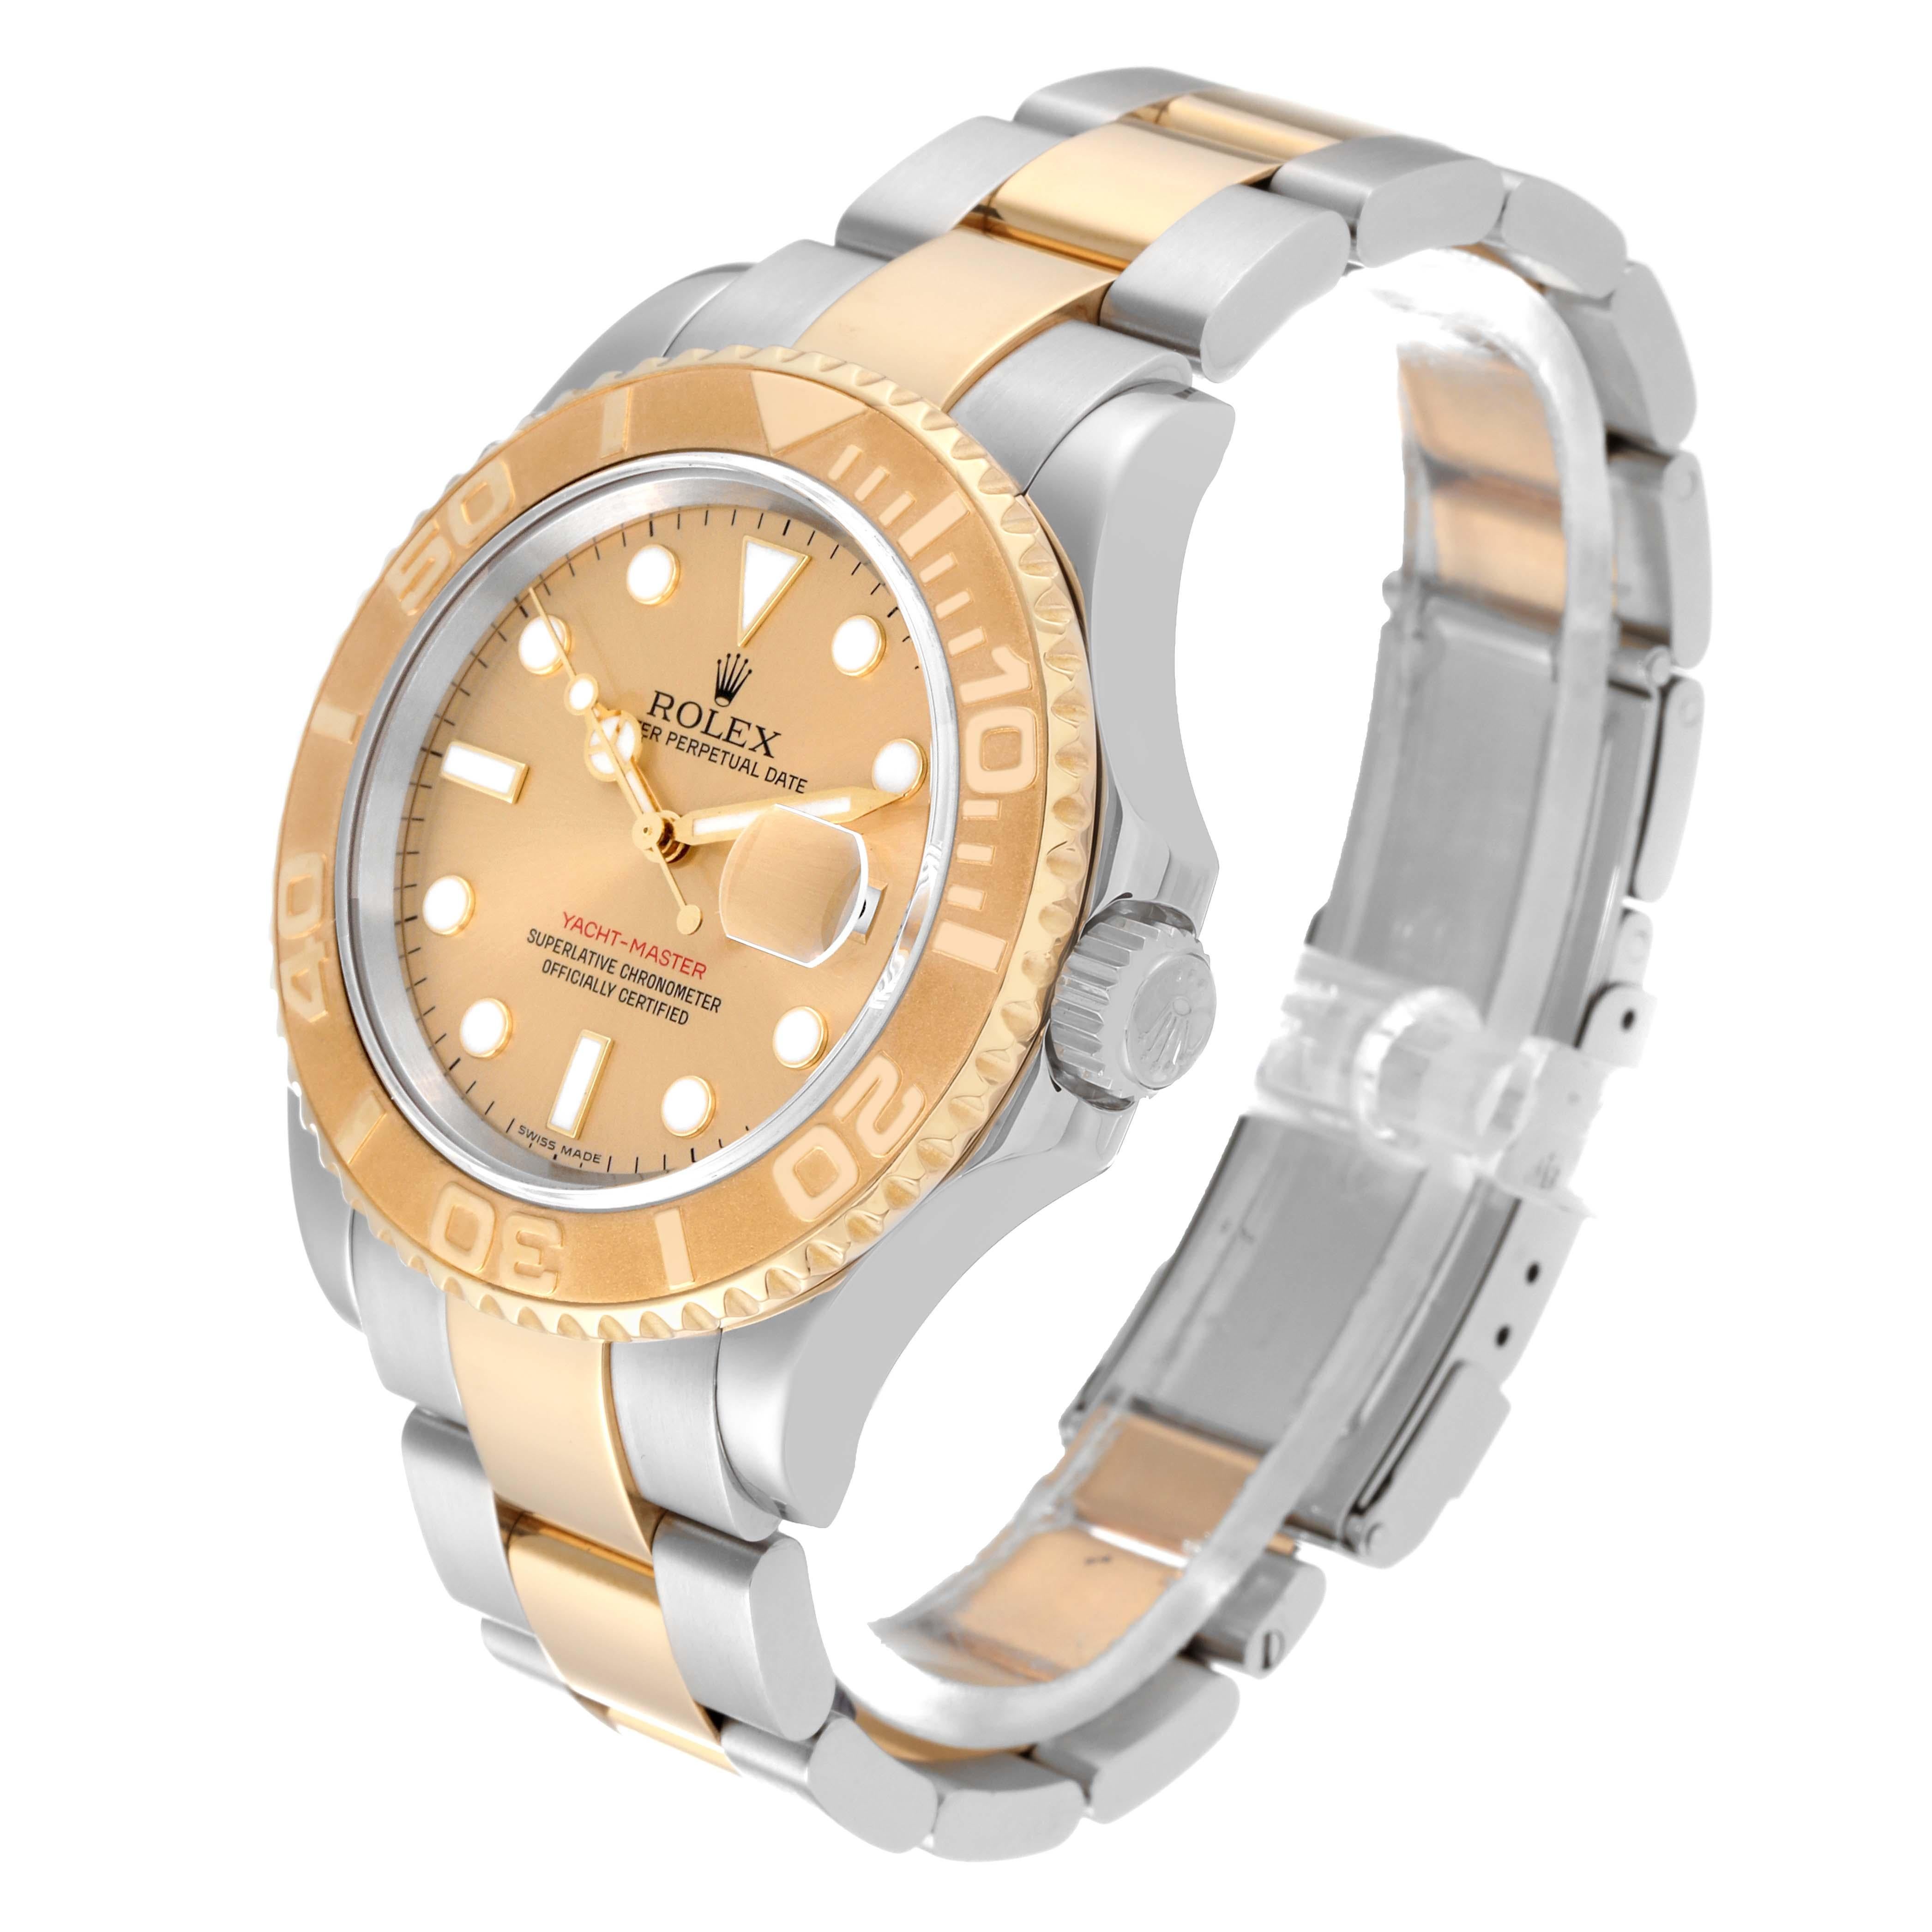 Rolex Yachtmaster Steel Yellow Gold Champagne Dial Mens Watch 16623 2